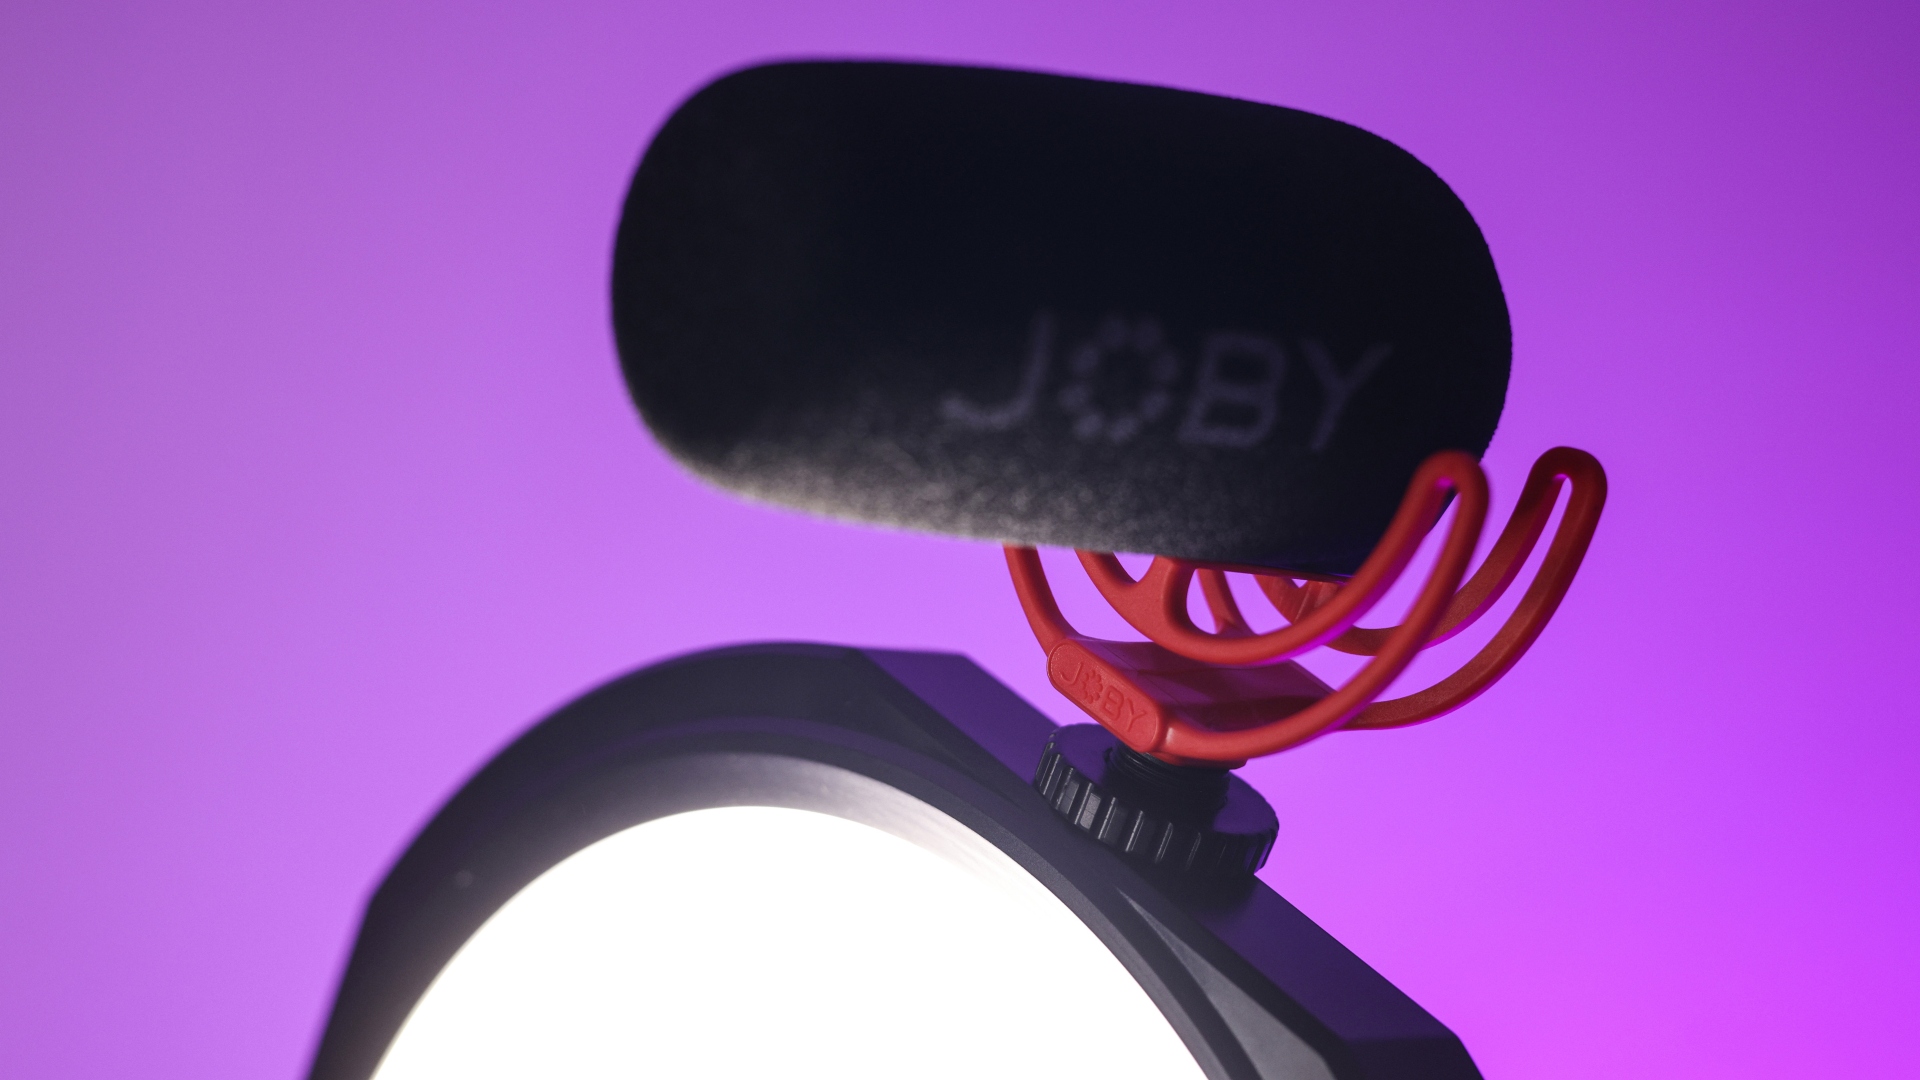 Joby Beamo Studio Key Light review image showing a microphone on top of the light.